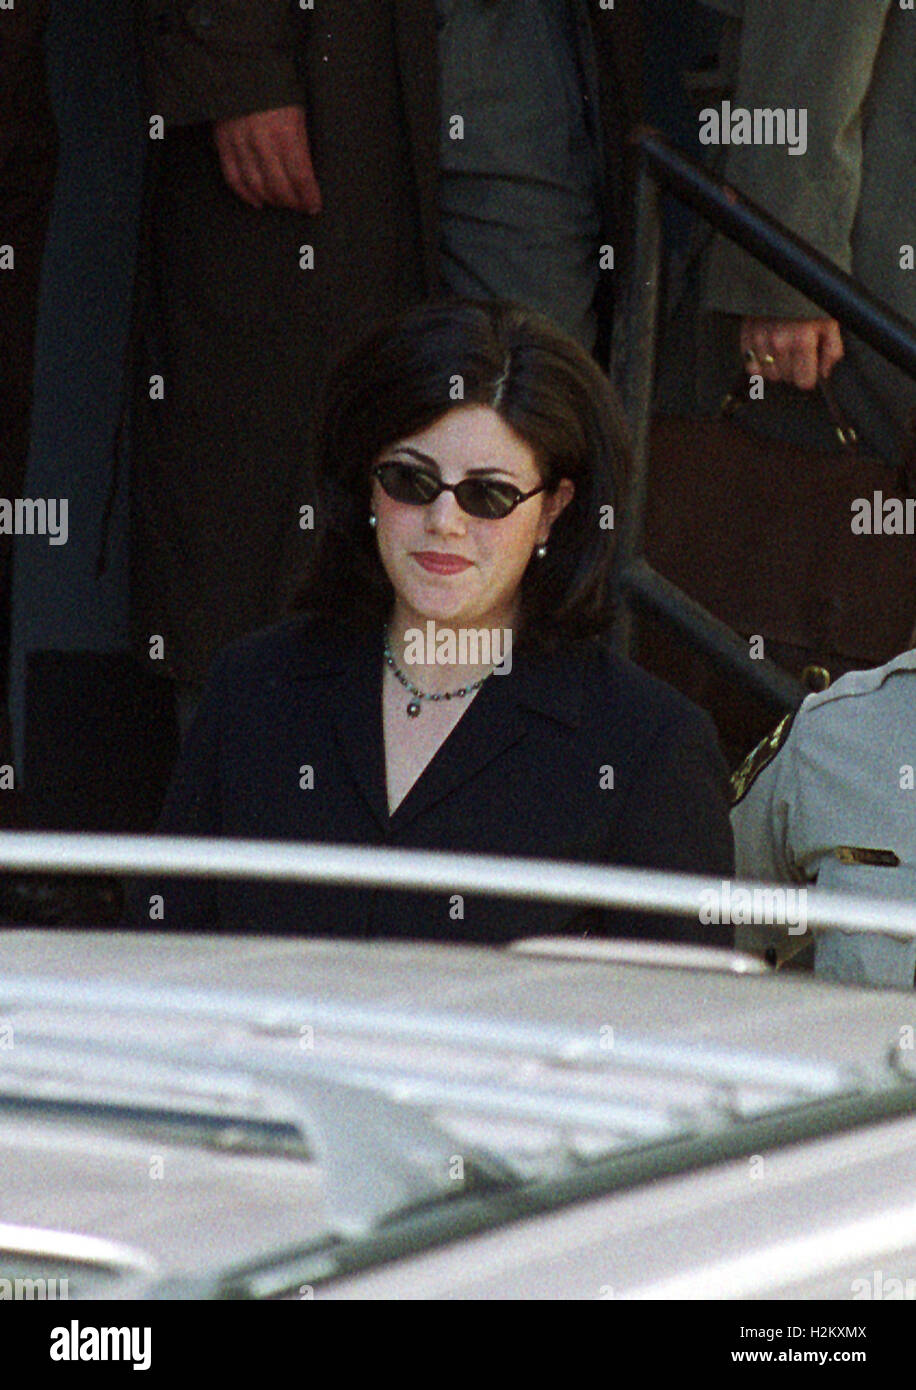 Ellicott City, MD - December 16, 1999 -- Monica Lewinsky departs Howard County (Maryland) Court after testifying in the Linda Tripp wiretap case on 16 December, 1999.Credit: Ron Sachs/CNP - NO WIRE SERVICE - Stock Photo